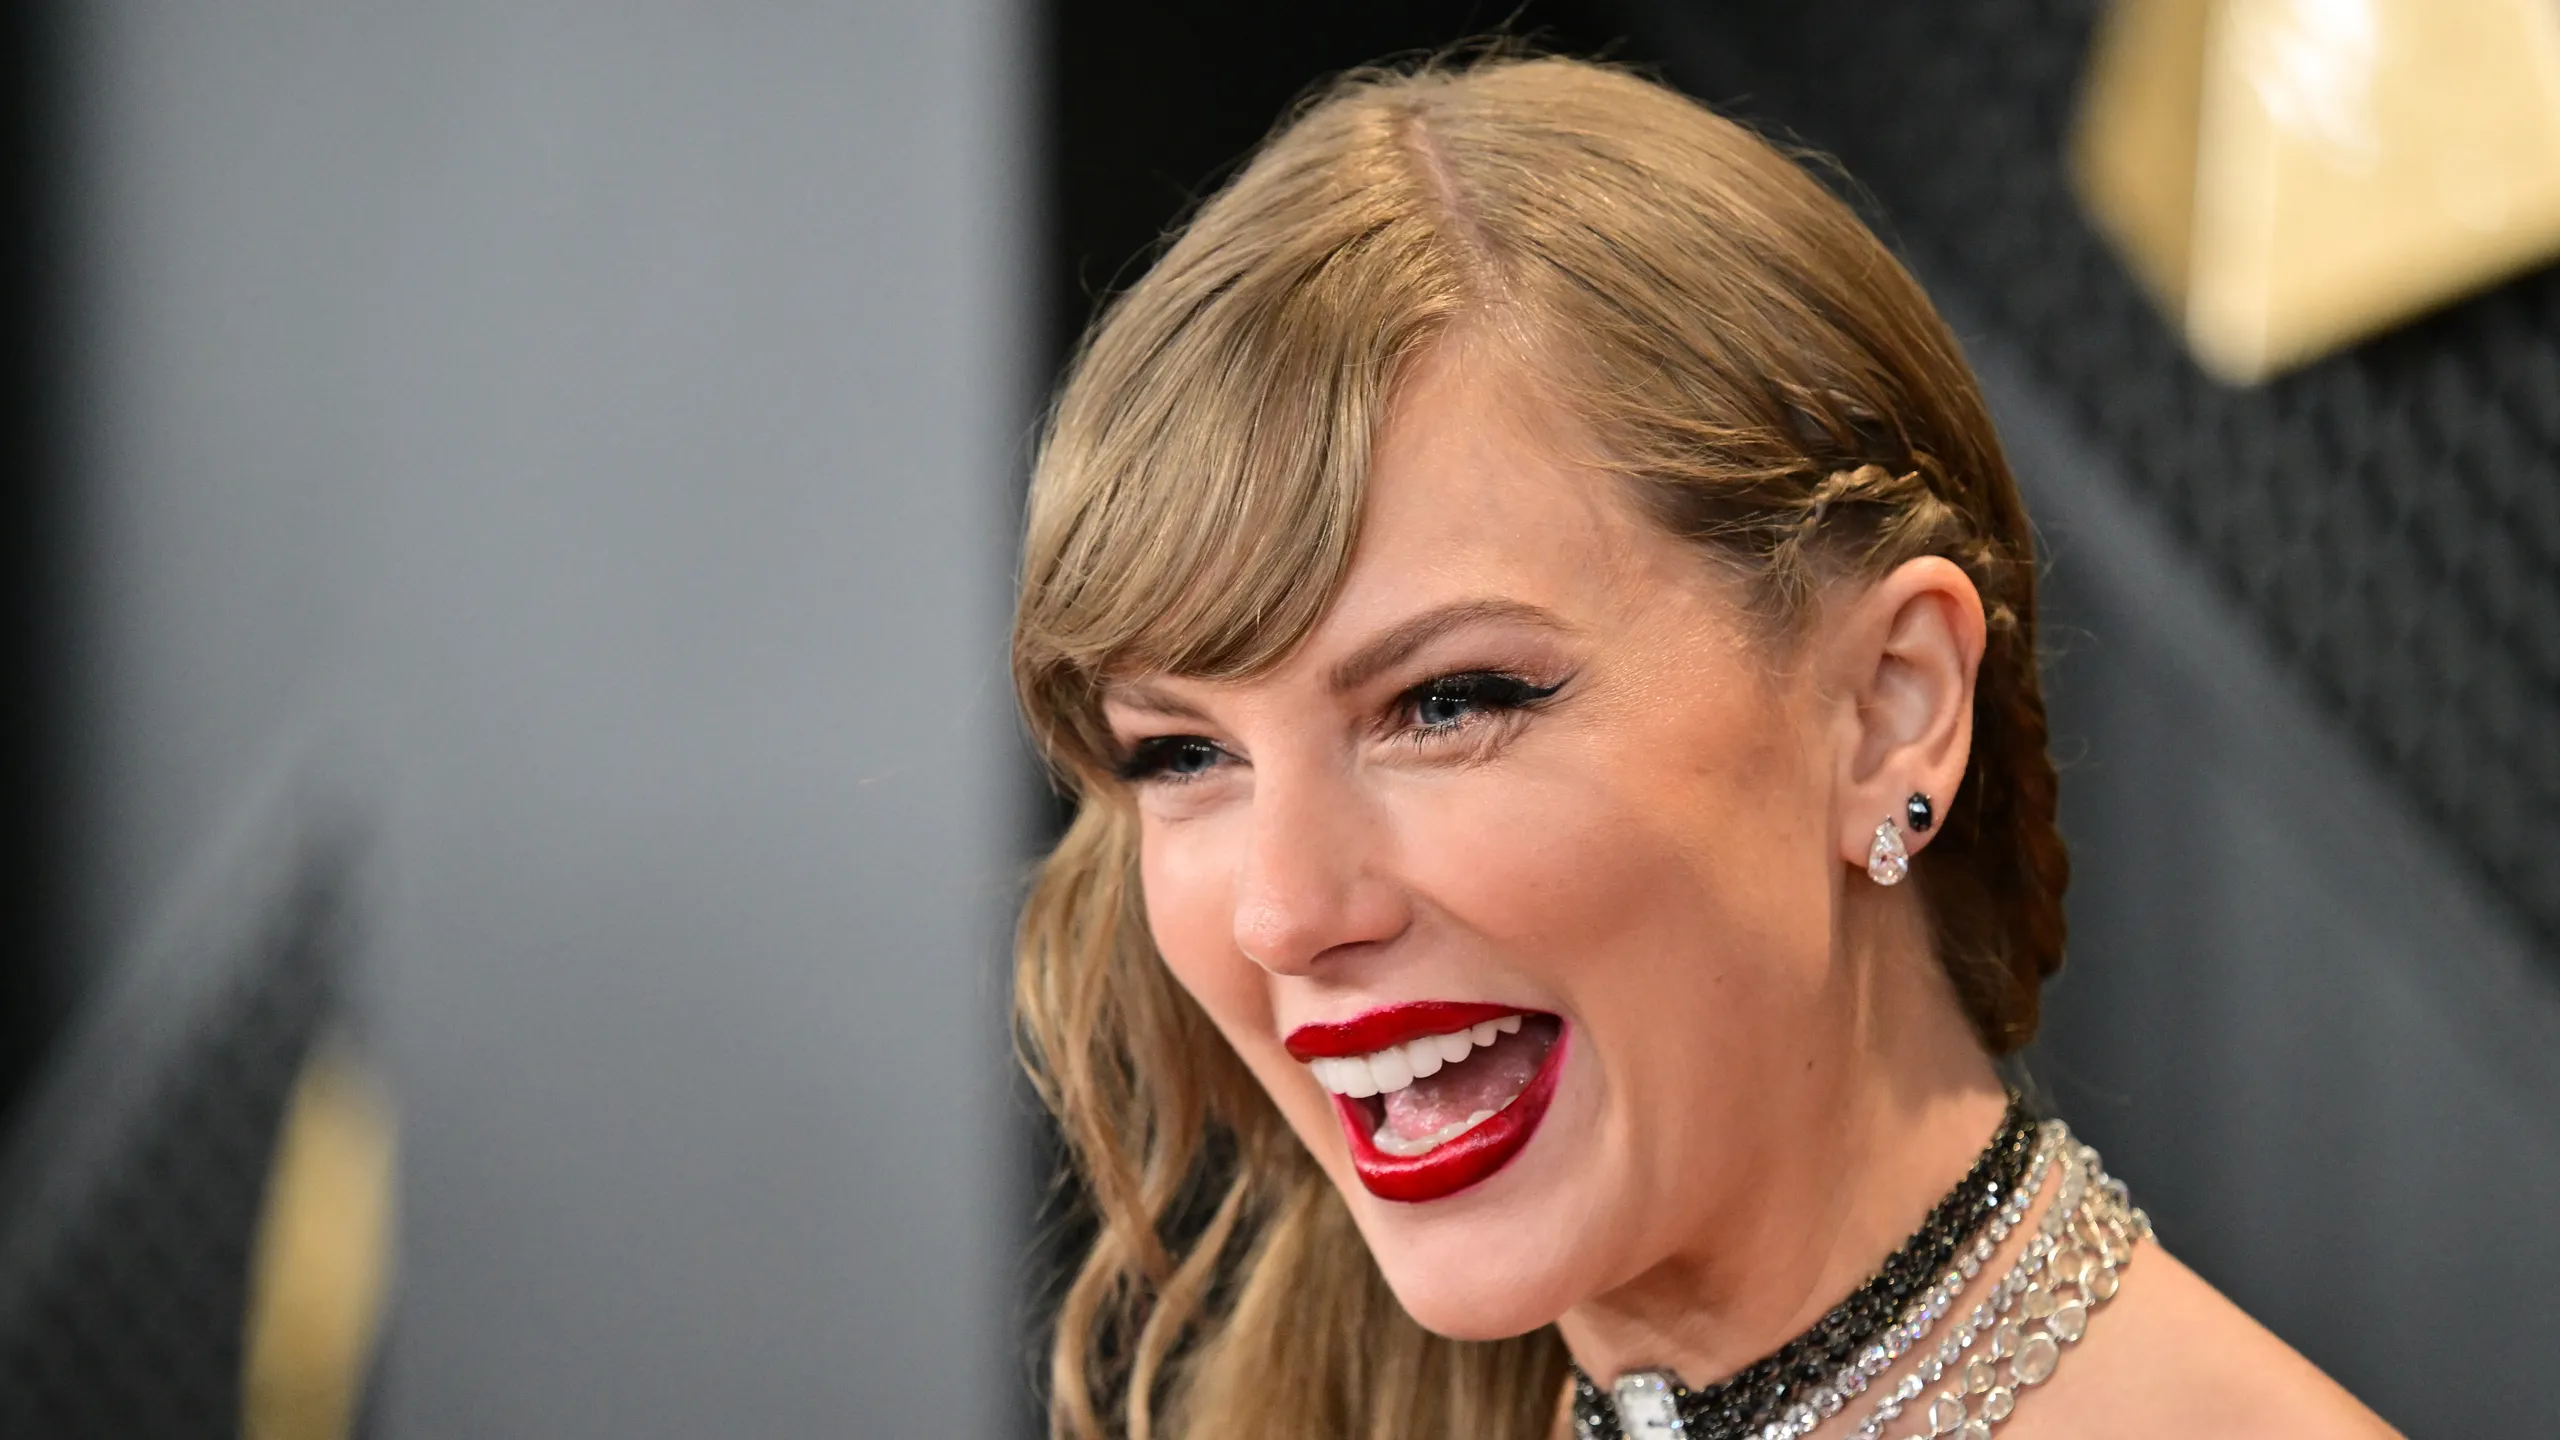  Swift response to a fan, who  accused her of cheating " after the Grammy speech